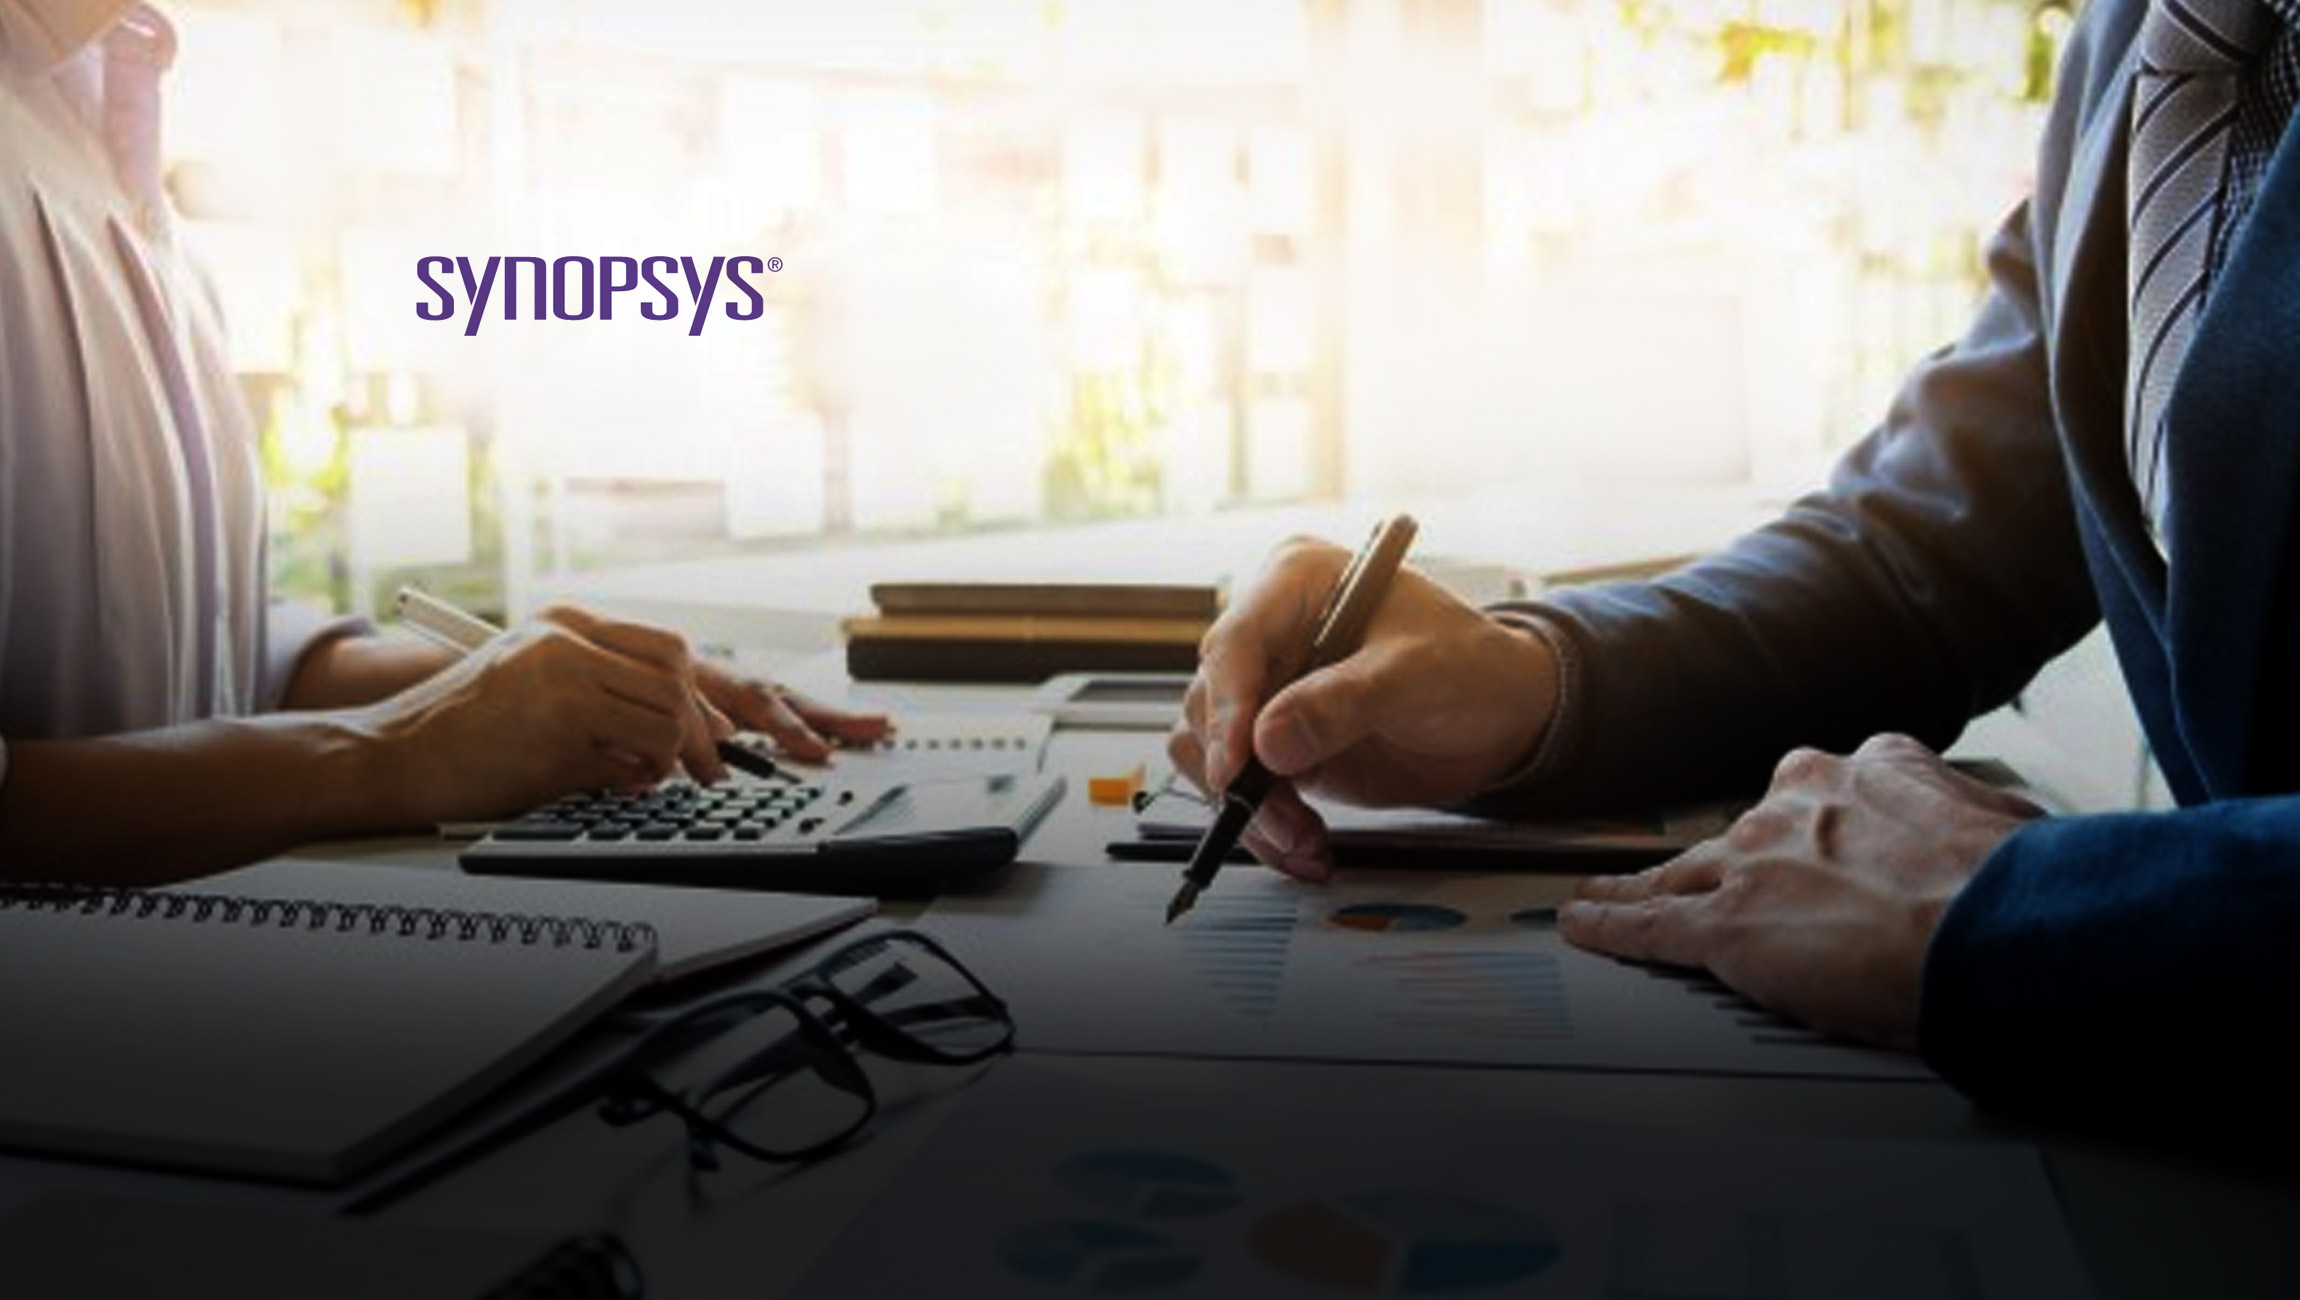 Synopsys Recognized as a Leader in Static Application Security Testing by Independent Research Firm